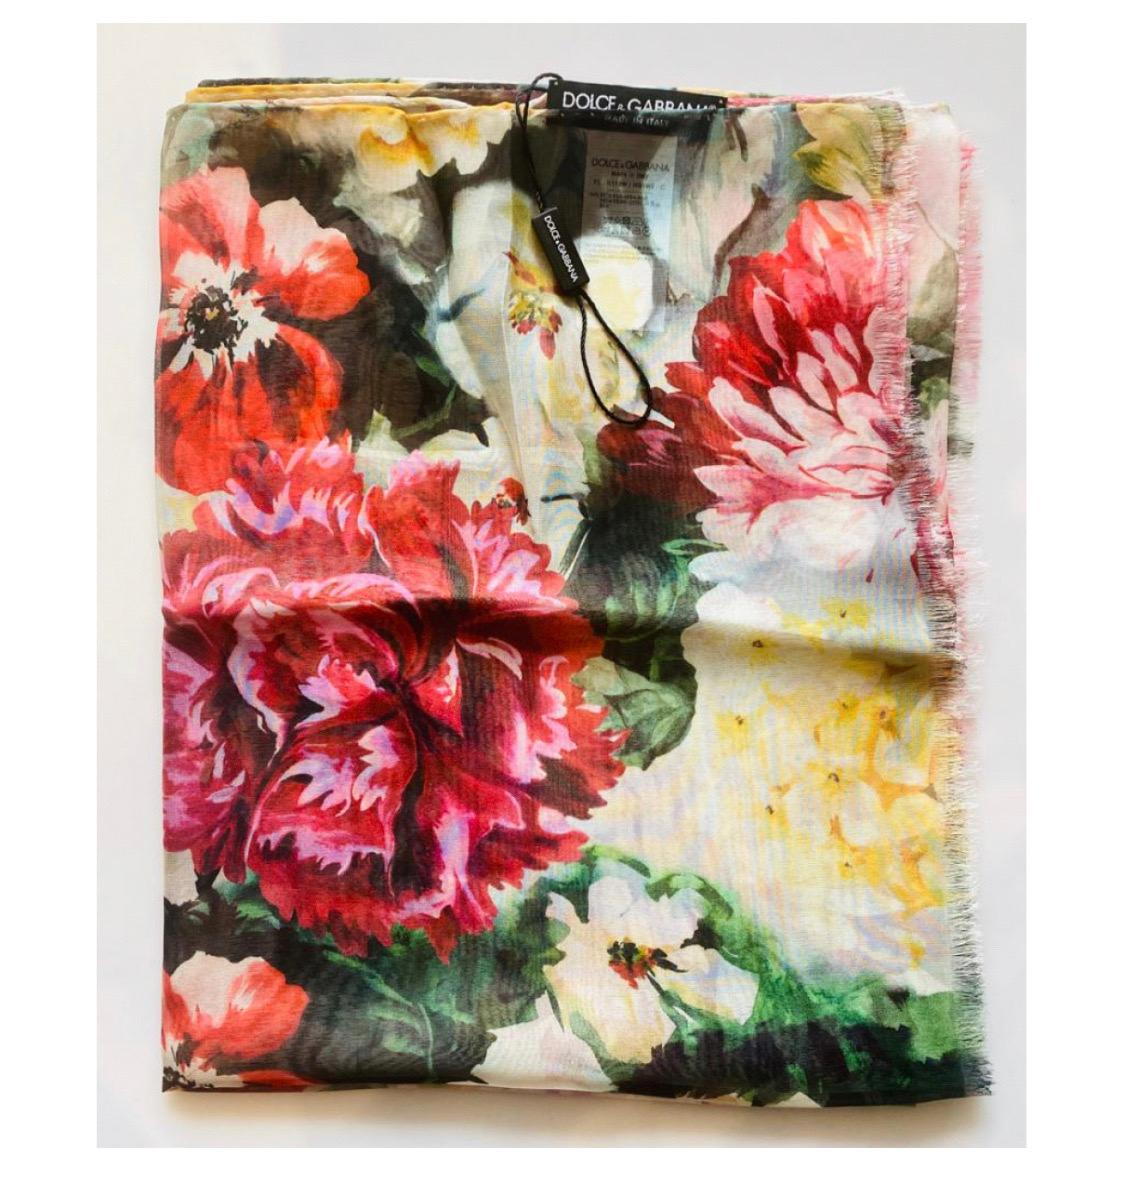 Brown Dolce & Gabbana Multicolor Silk Floral Scarf Wrap Accessory Flowers Peony DG  For Sale